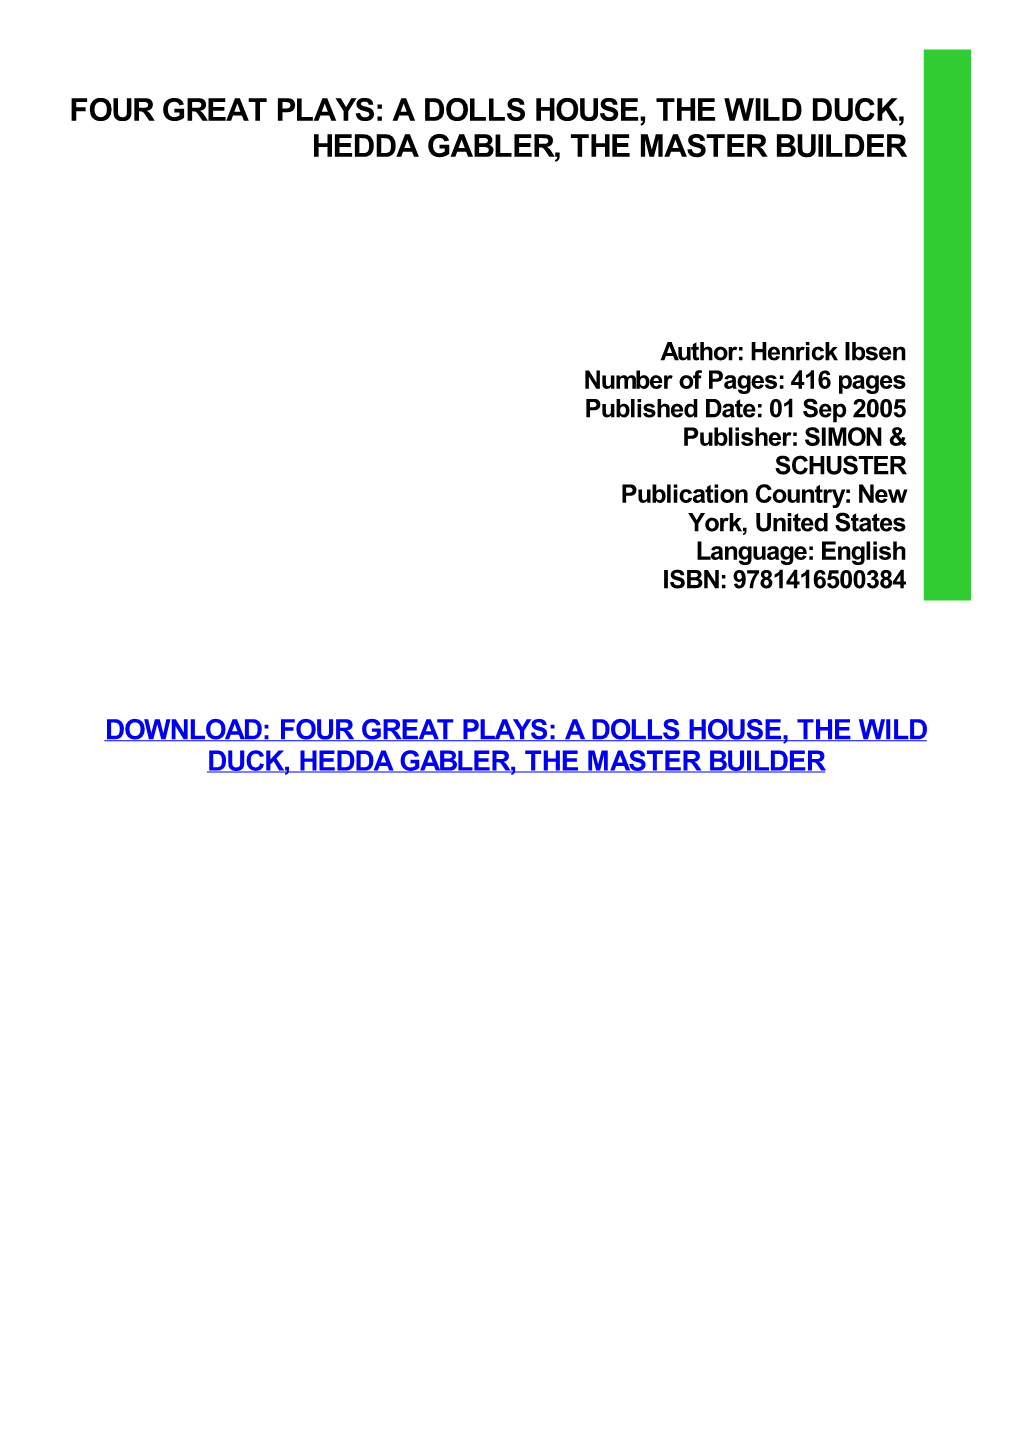 {Download PDF} Four Great Plays: a Dolls House, the Wild Duck, Hedda